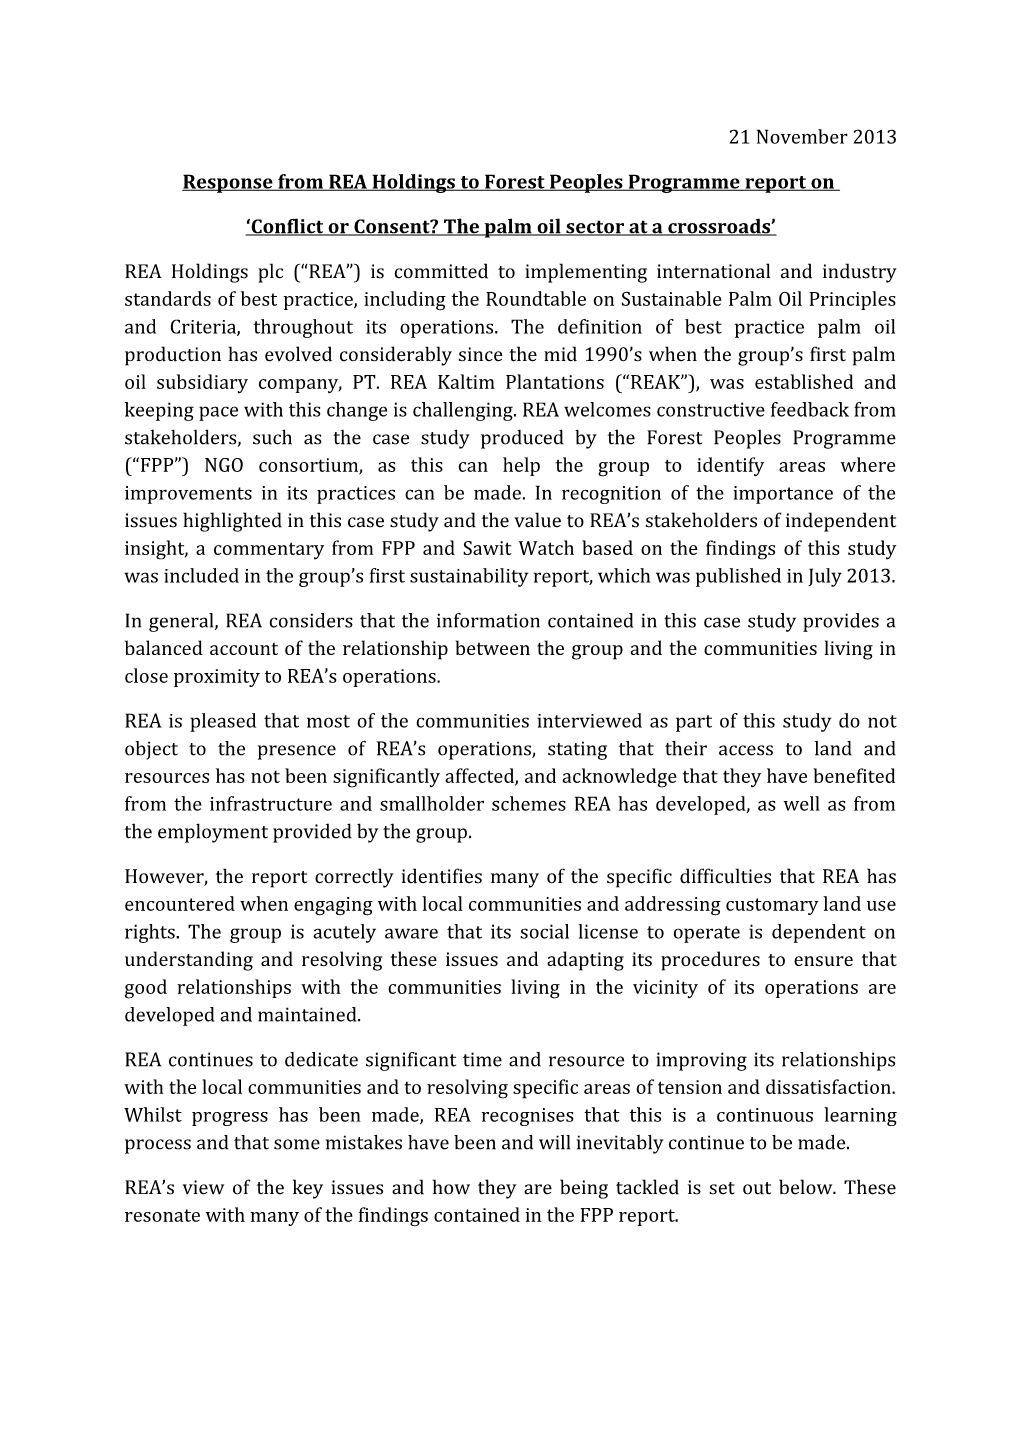 Response from REA Holdings to Forest Peoples Programme Report On